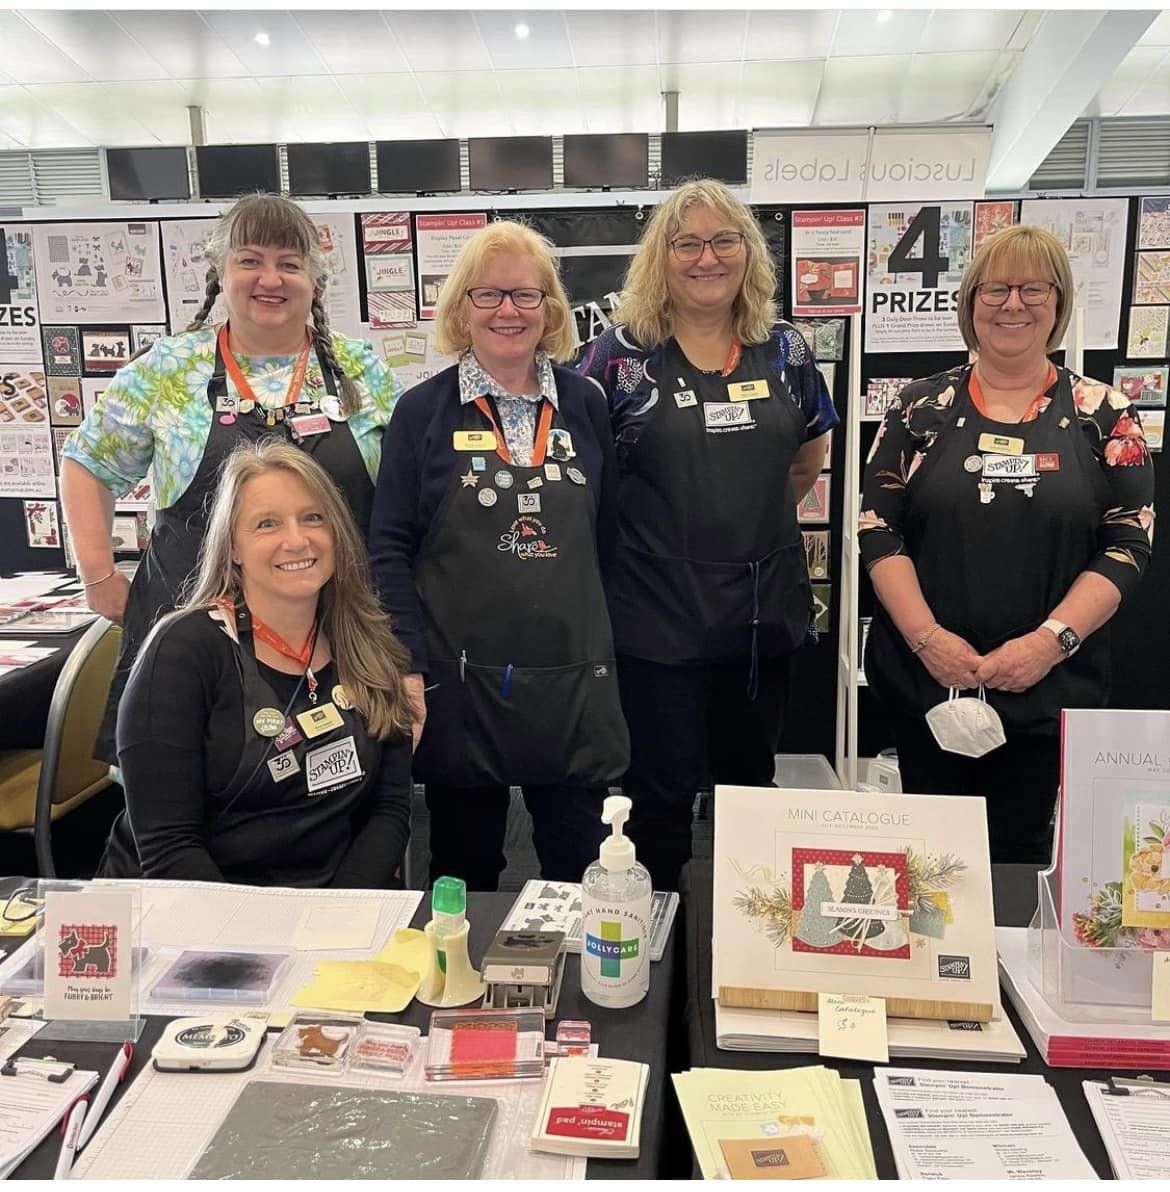 Join Stampin' Up! and become a Stampin' Up! Demonstrator. Here I am with some of my team members working at one of the recent Melbourne Papercraft Shows.